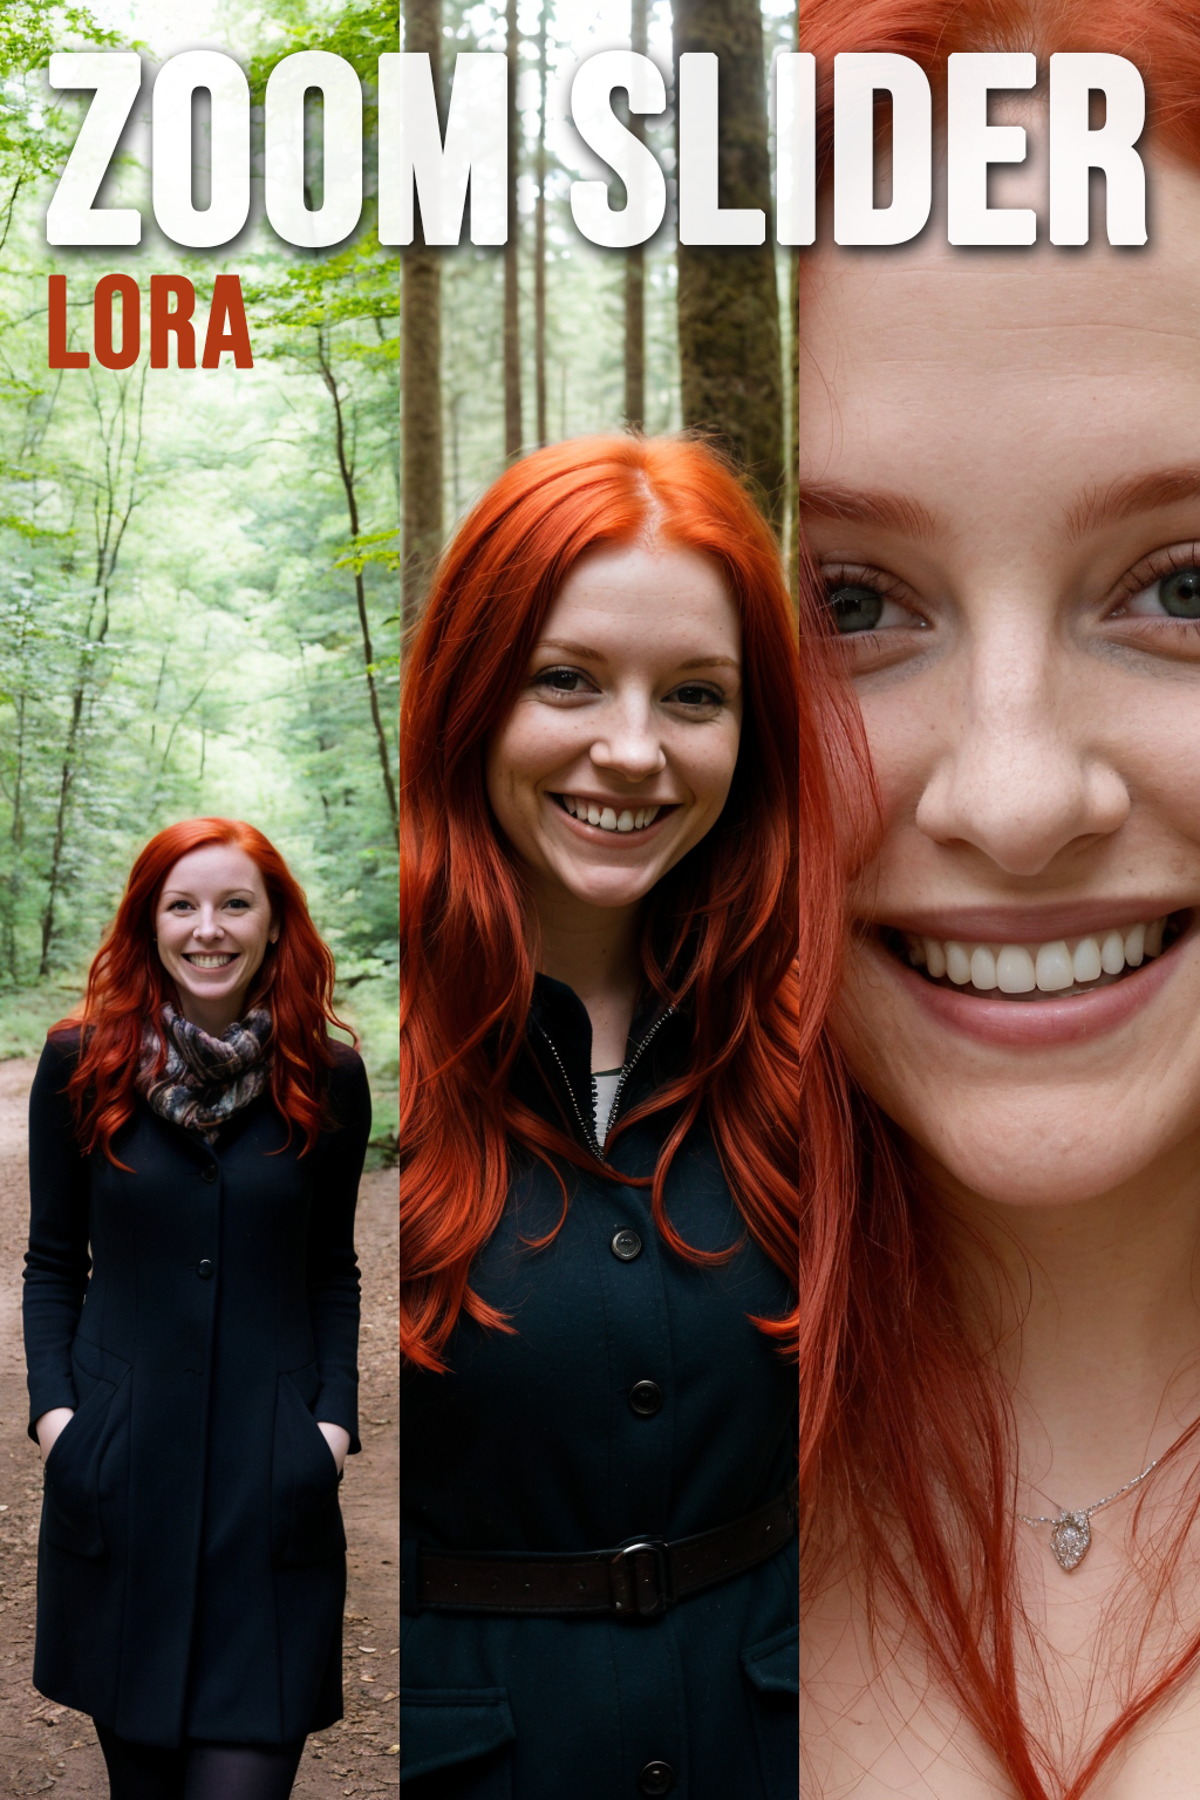 Smiling woman with red hair posing in a forest setting.